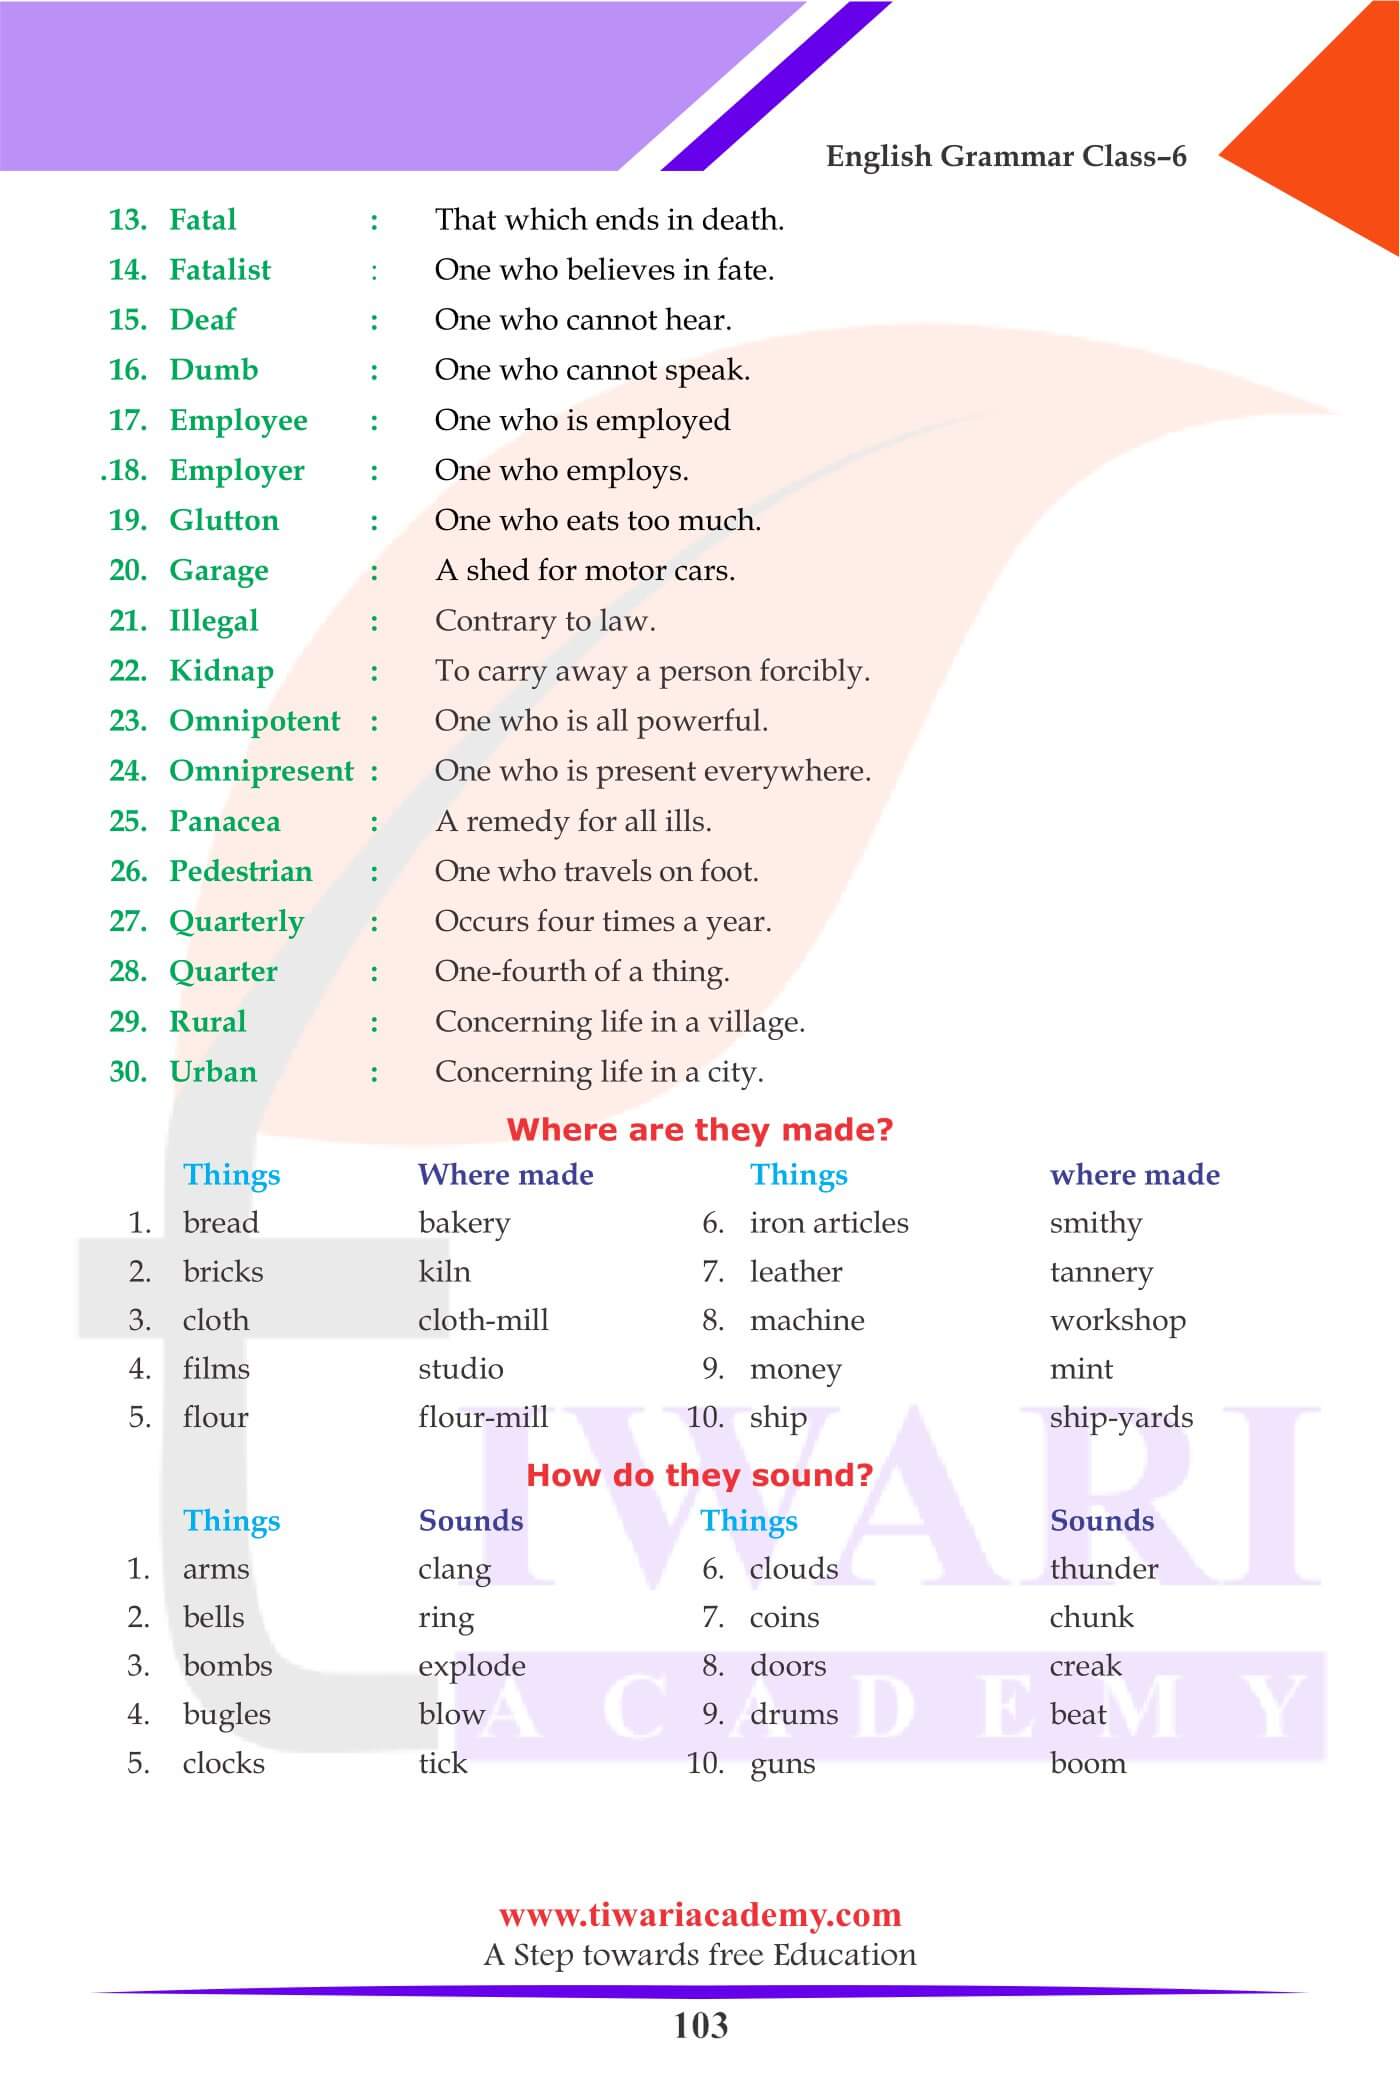 Class 6 Grammar Chapter 25 Vocabulary and Word Power